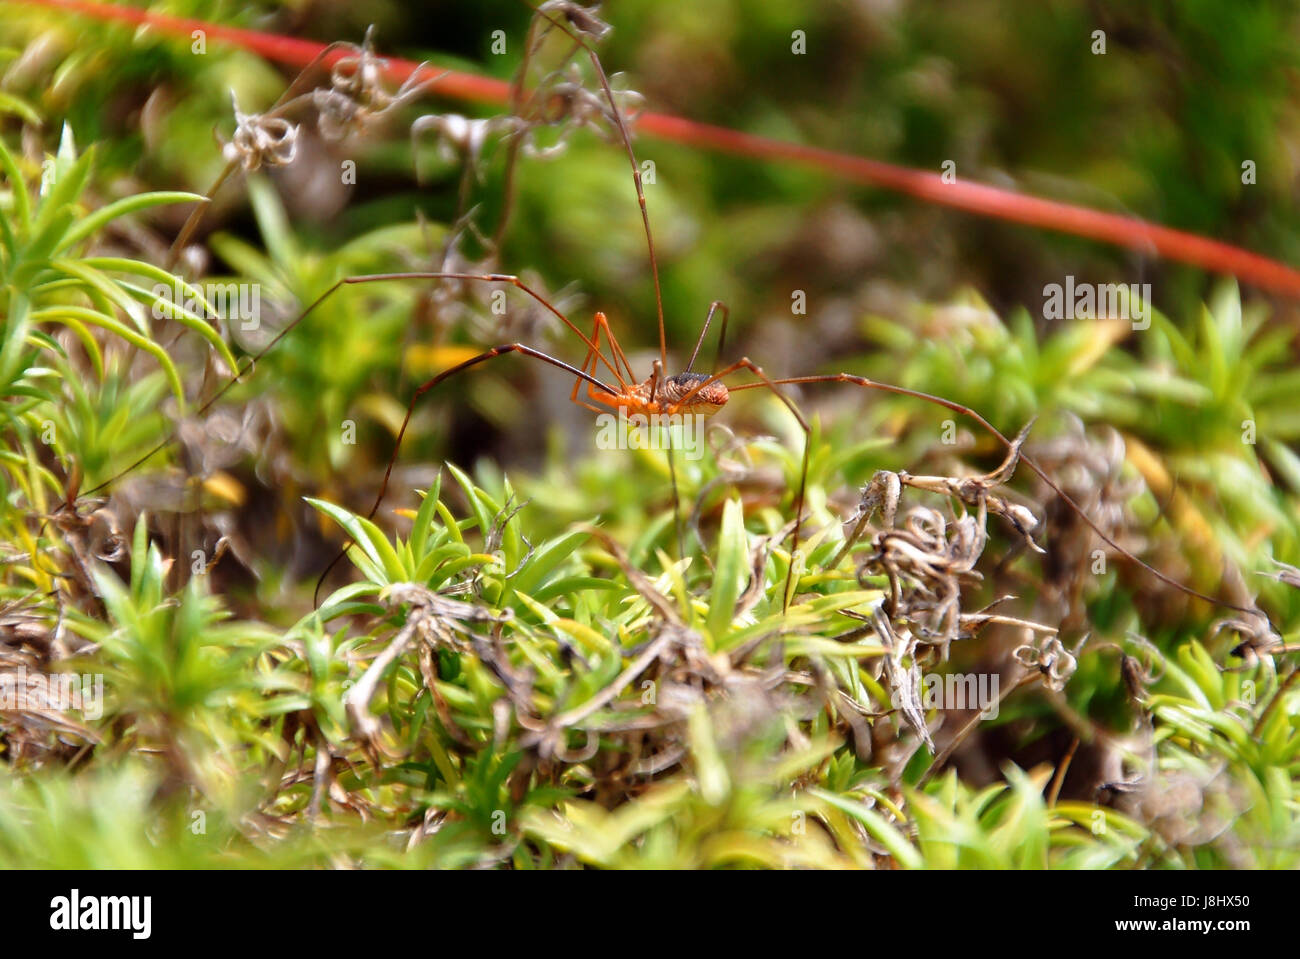 fodder, insect, spider, fly, doll, to gorge, engulf, devour, page, sheet, bee, Stock Photo